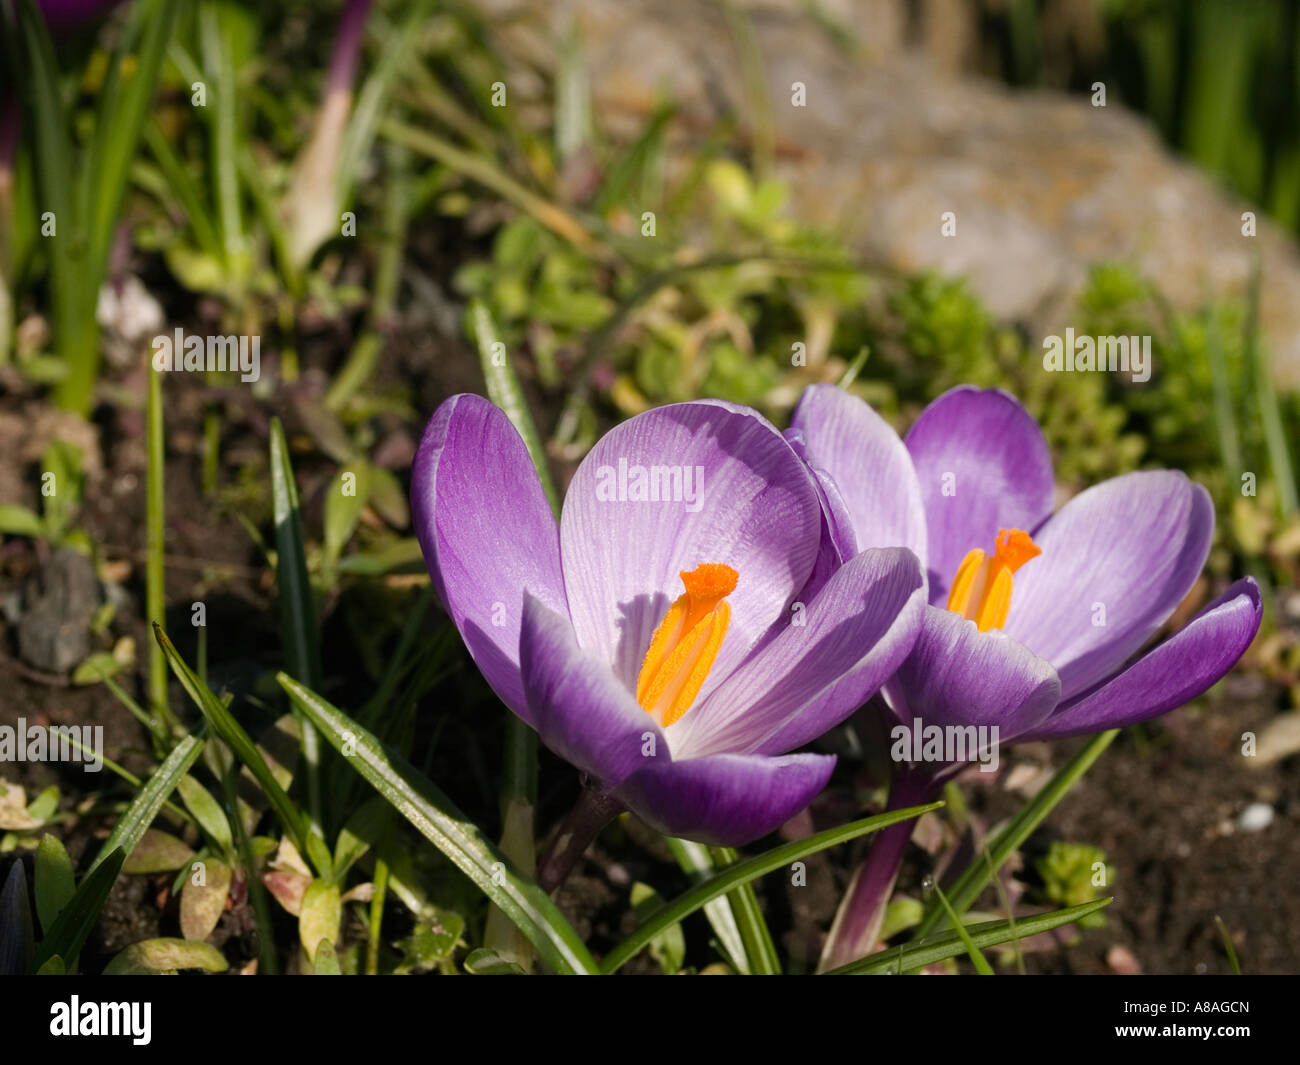 Spring flowers in an English garden Stock Photo